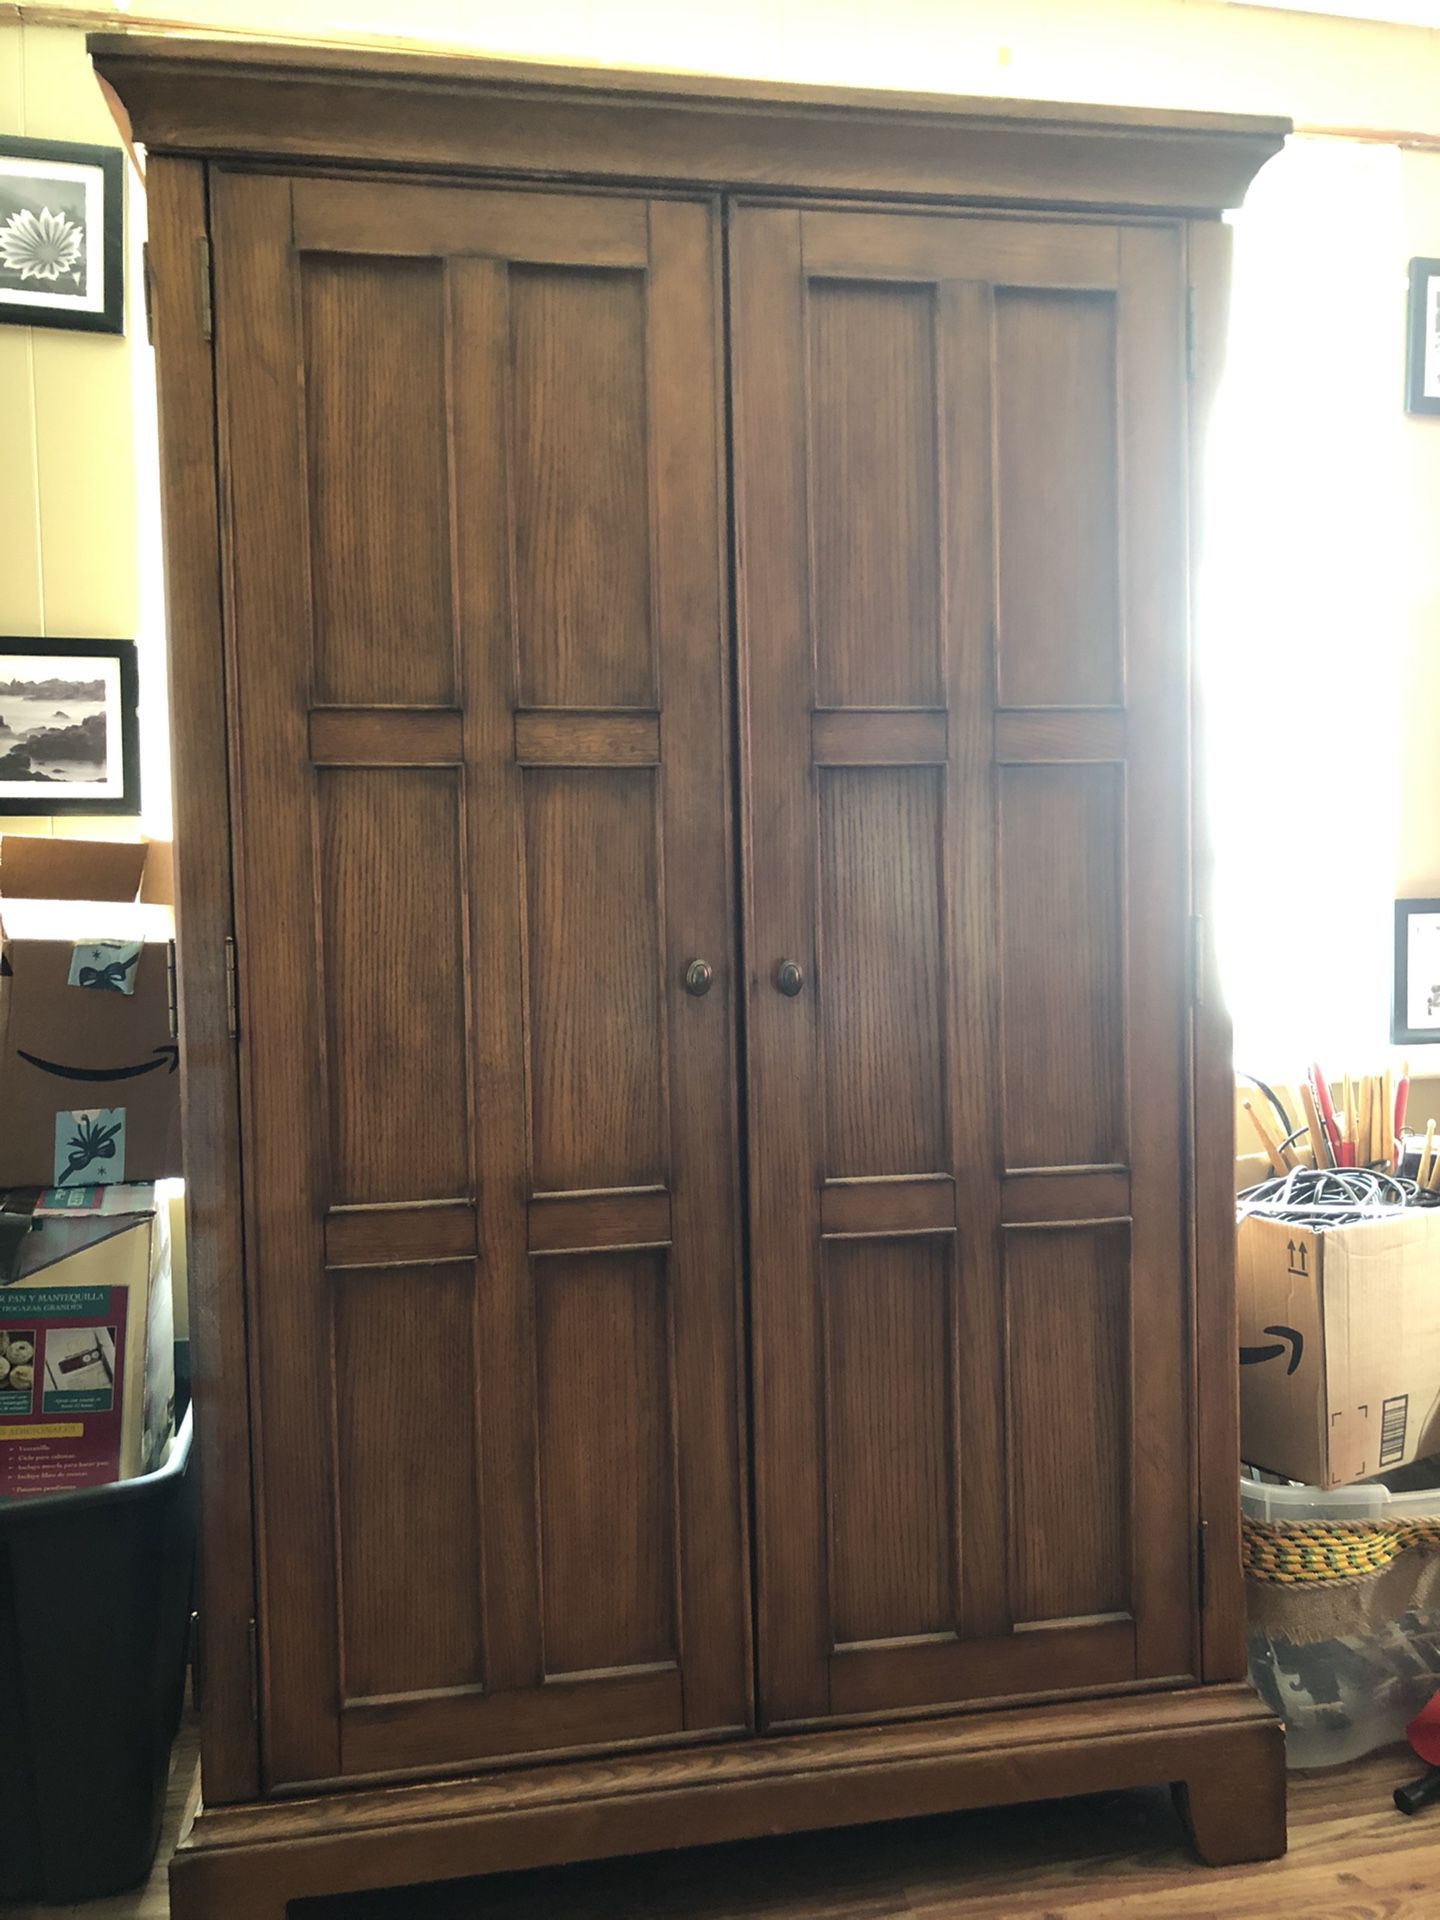 Computer Armoire. In Collingswood NJ. Make Offer!